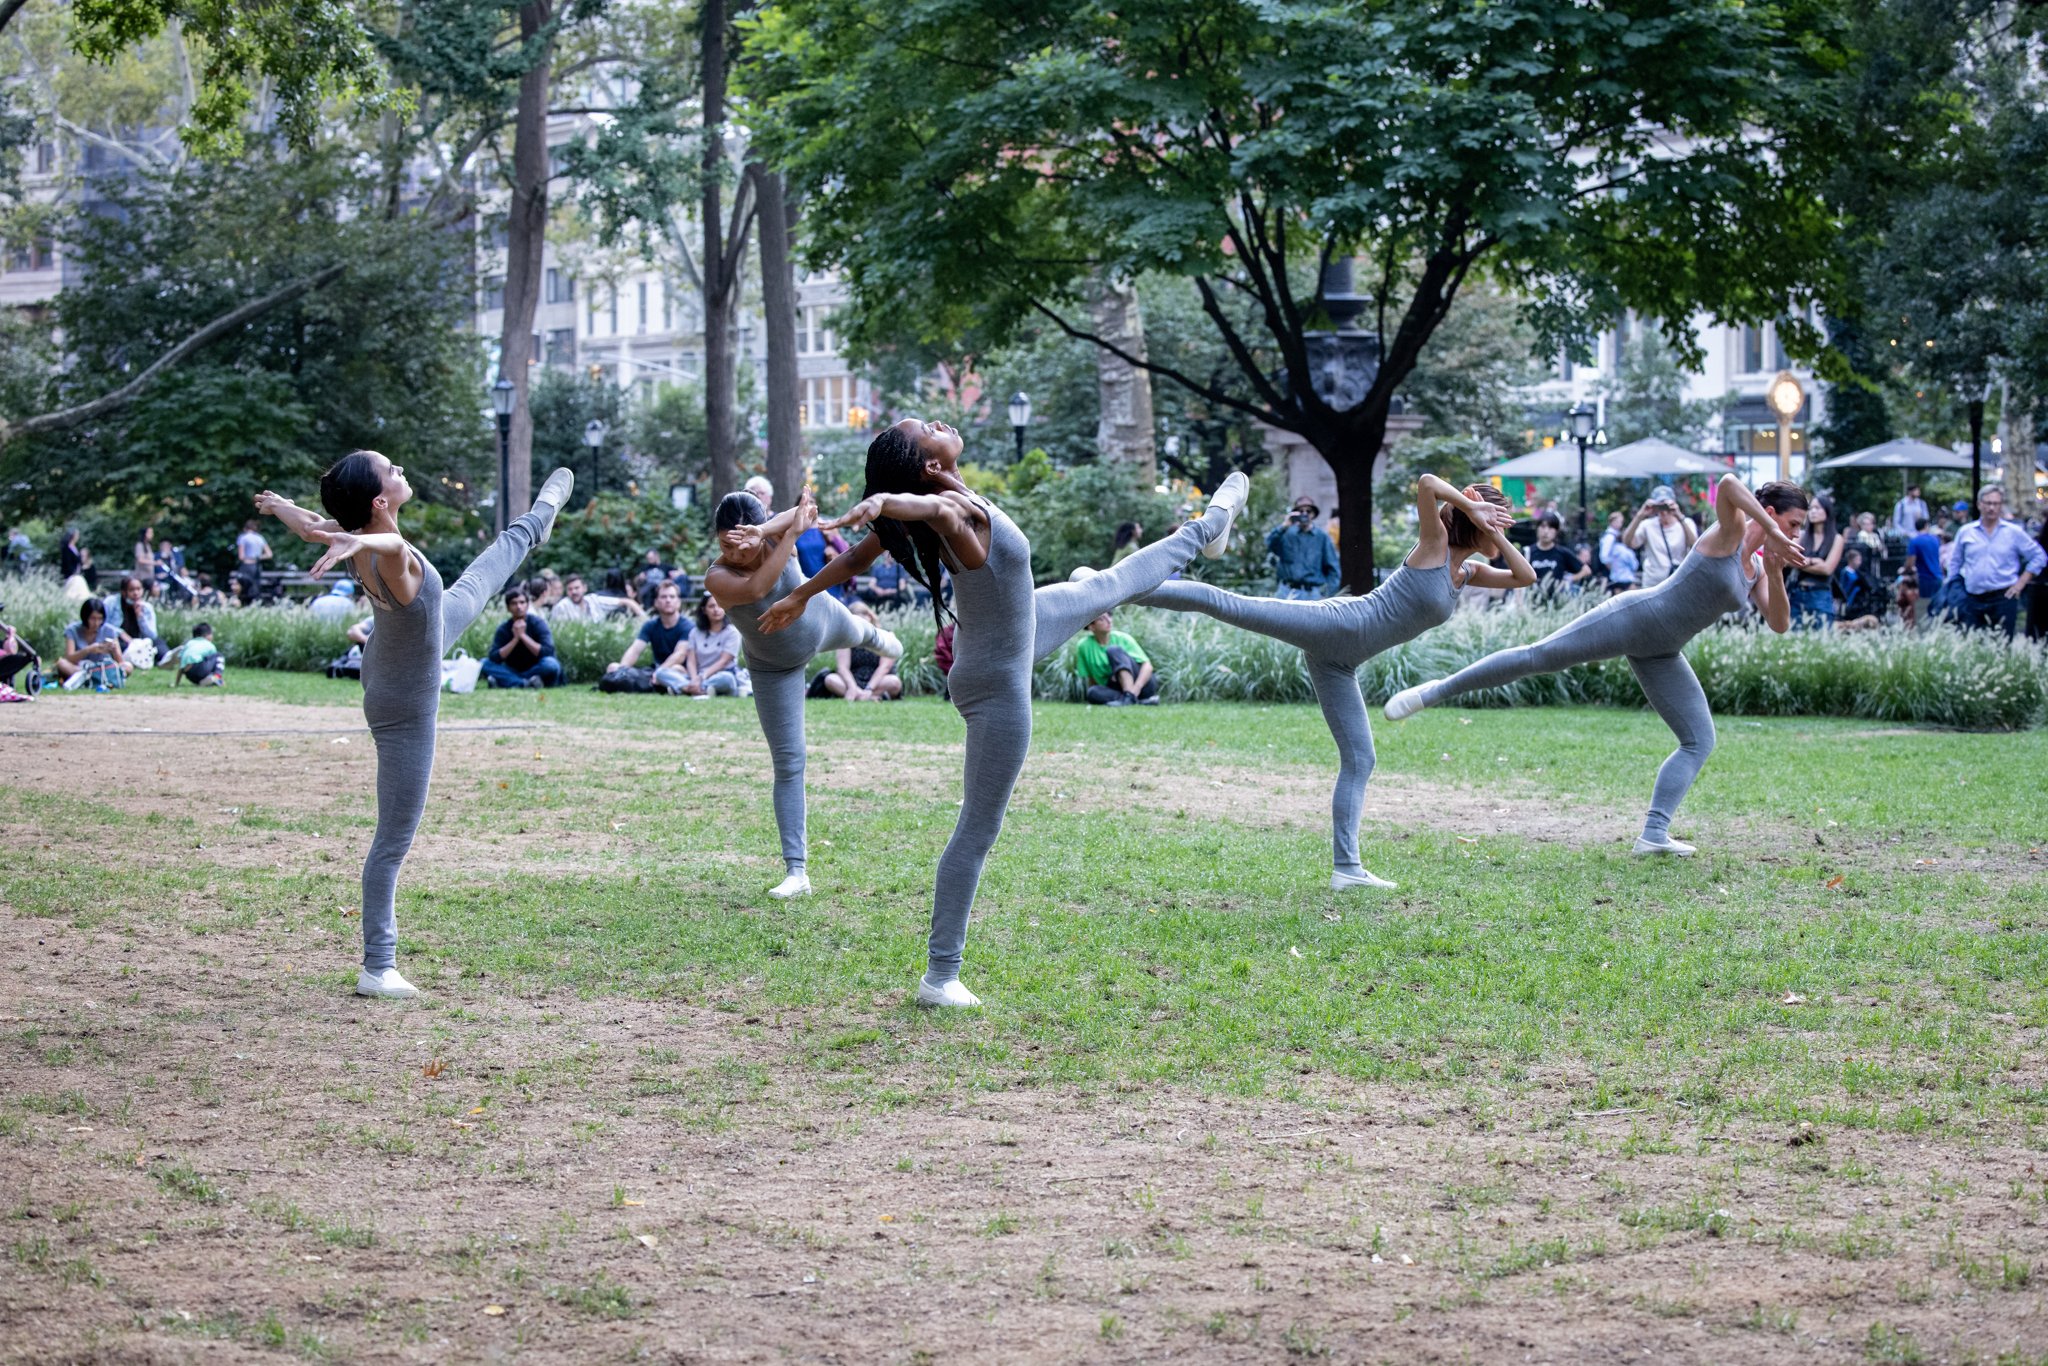  Full Ensemble in Beau Bree Rhee, Shadow of the Sea, 2022. Performance view, Madison Square Park, September 21, 2022. Presented by The Kitchen in partnership with Madison Square Park Conservancy. Artwork pictured: Cristina Iglesias (Spanish, b. 1956)